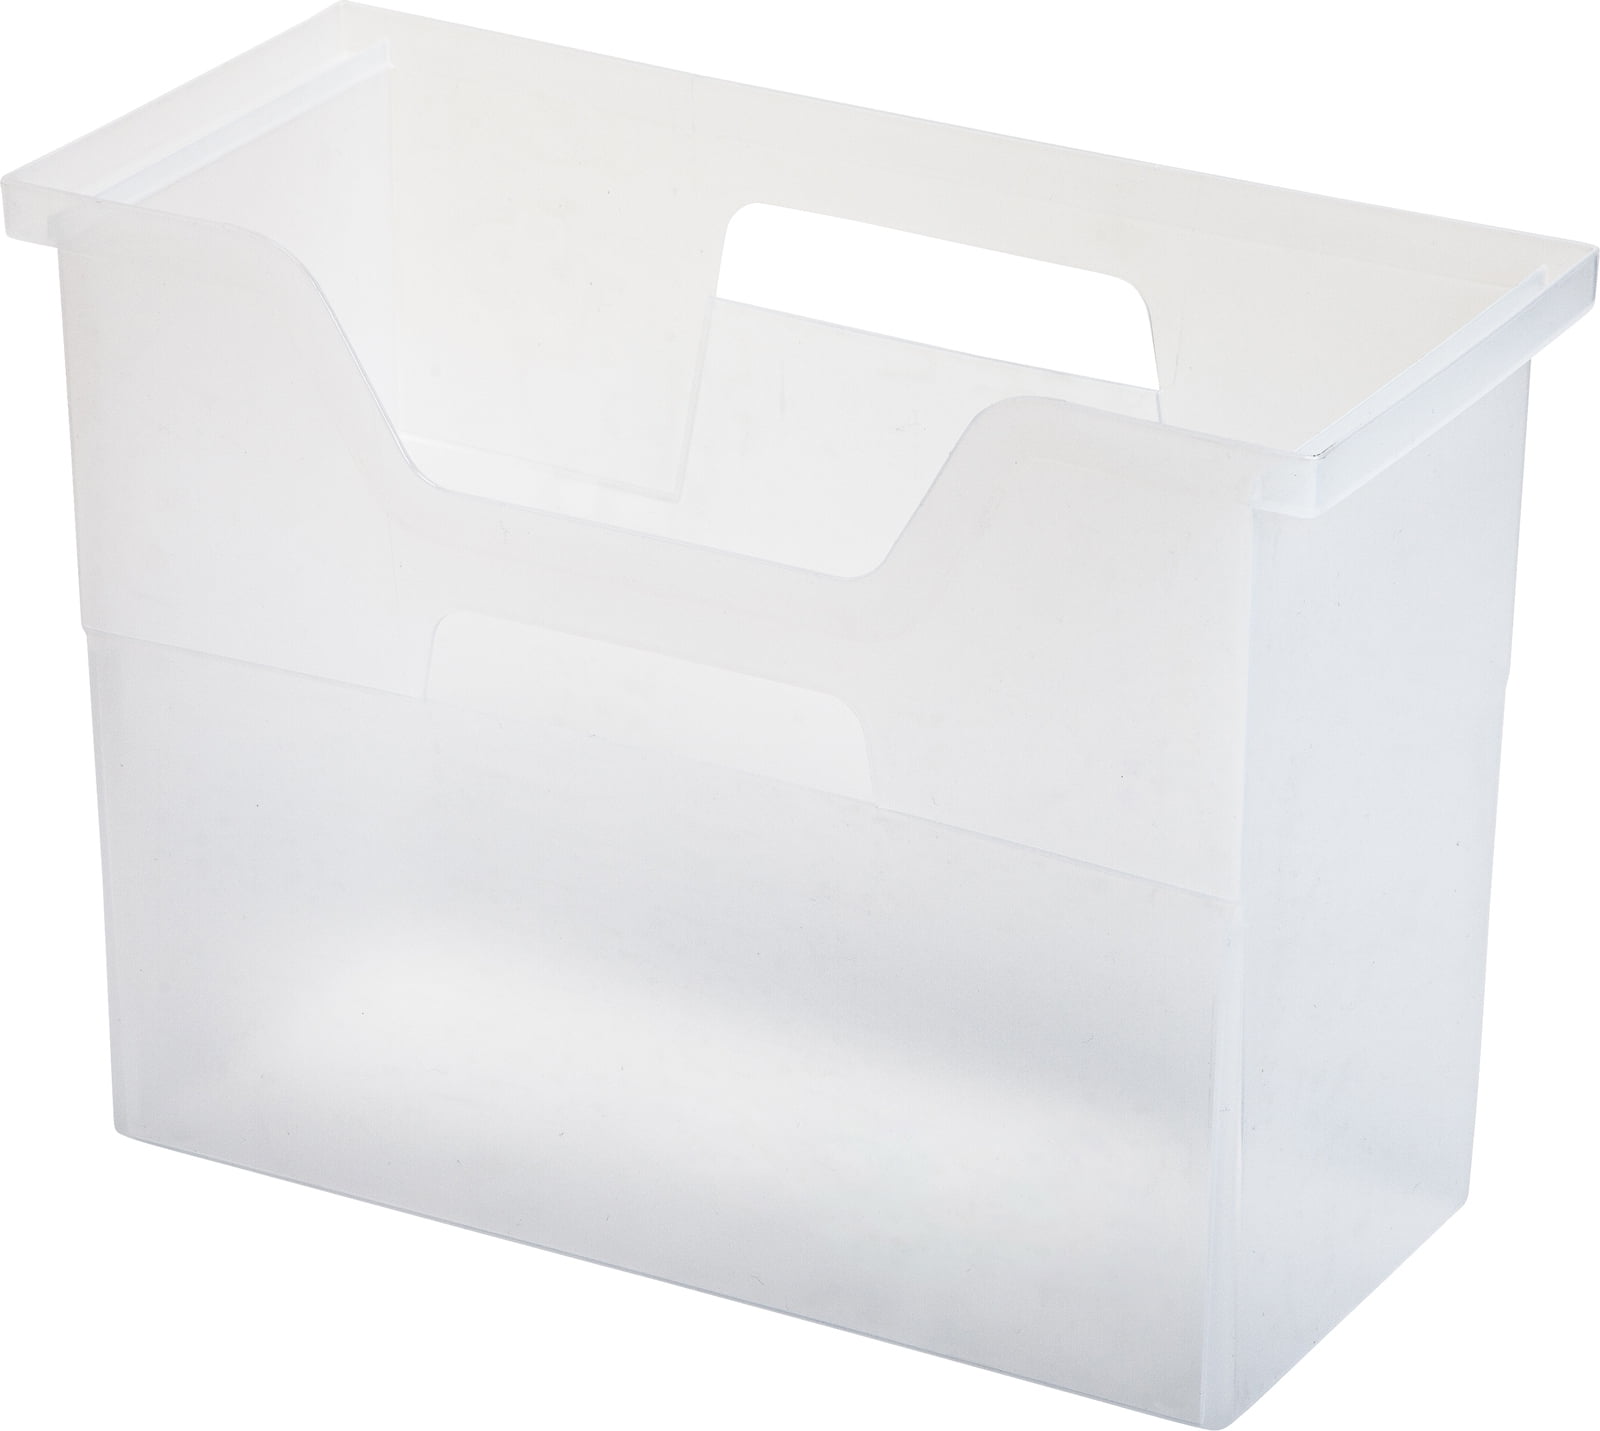 Exacompta - Ref. 50600E - 1 file box with Exabox rubber bands - in glossy  card 600g/m2 - Spine 6 cm - dimensions 25 x 33 cm - for A4 documents 